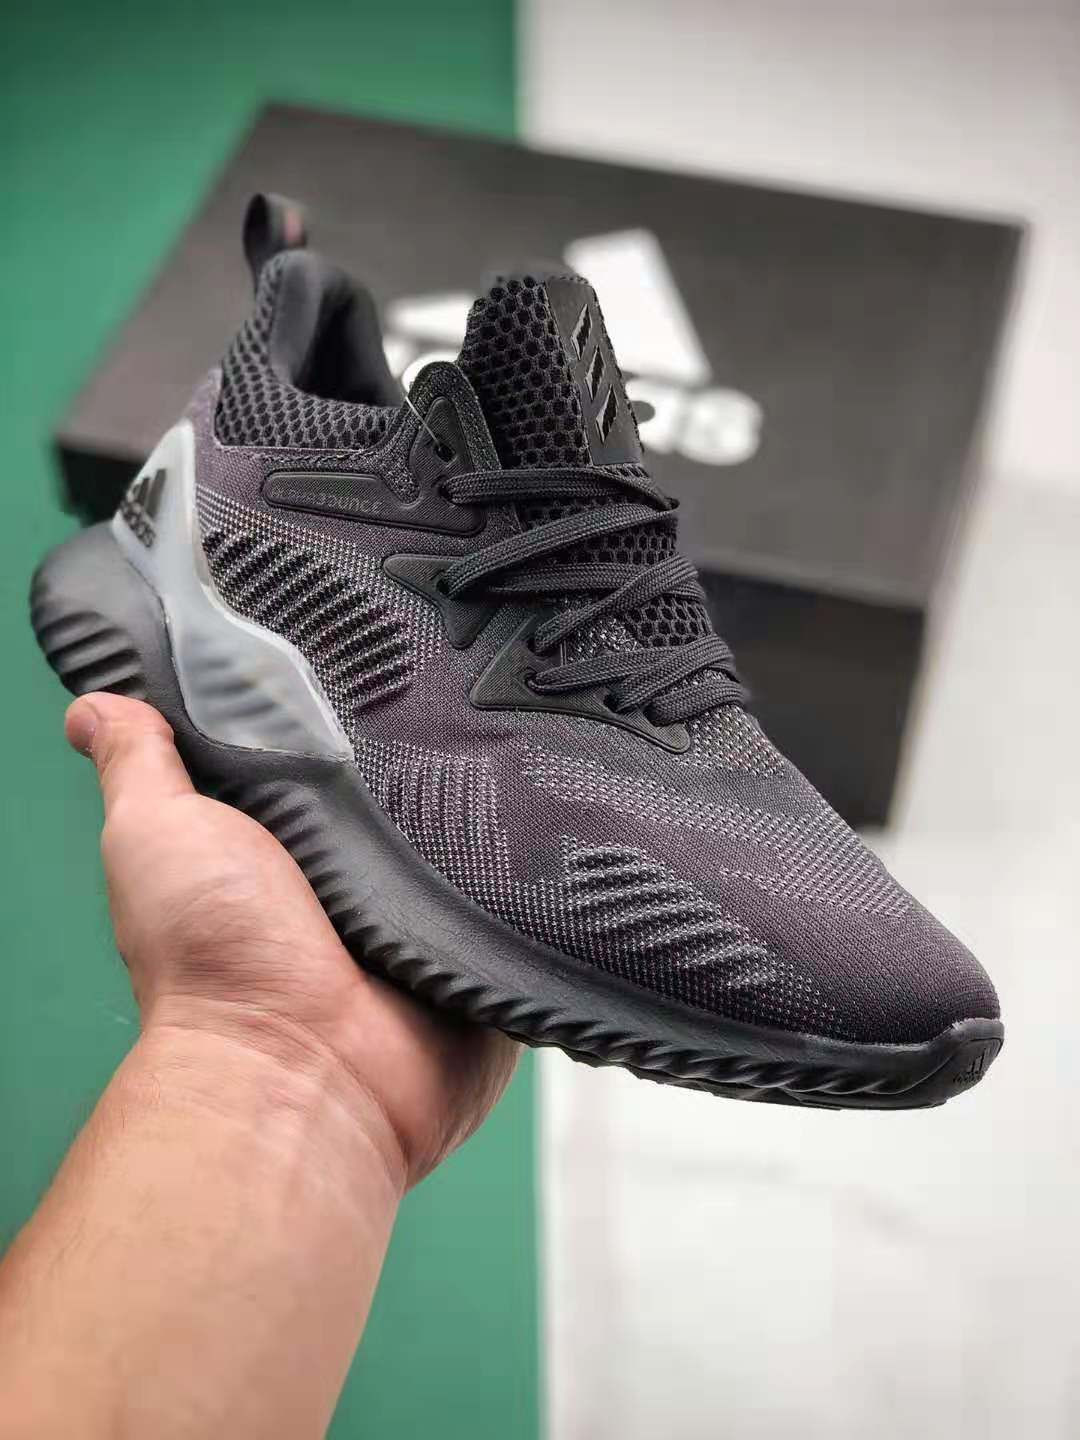 Adidas Alphabounce Beyond Triple Grey CG4765 - Trendy and Versatile Running Shoes